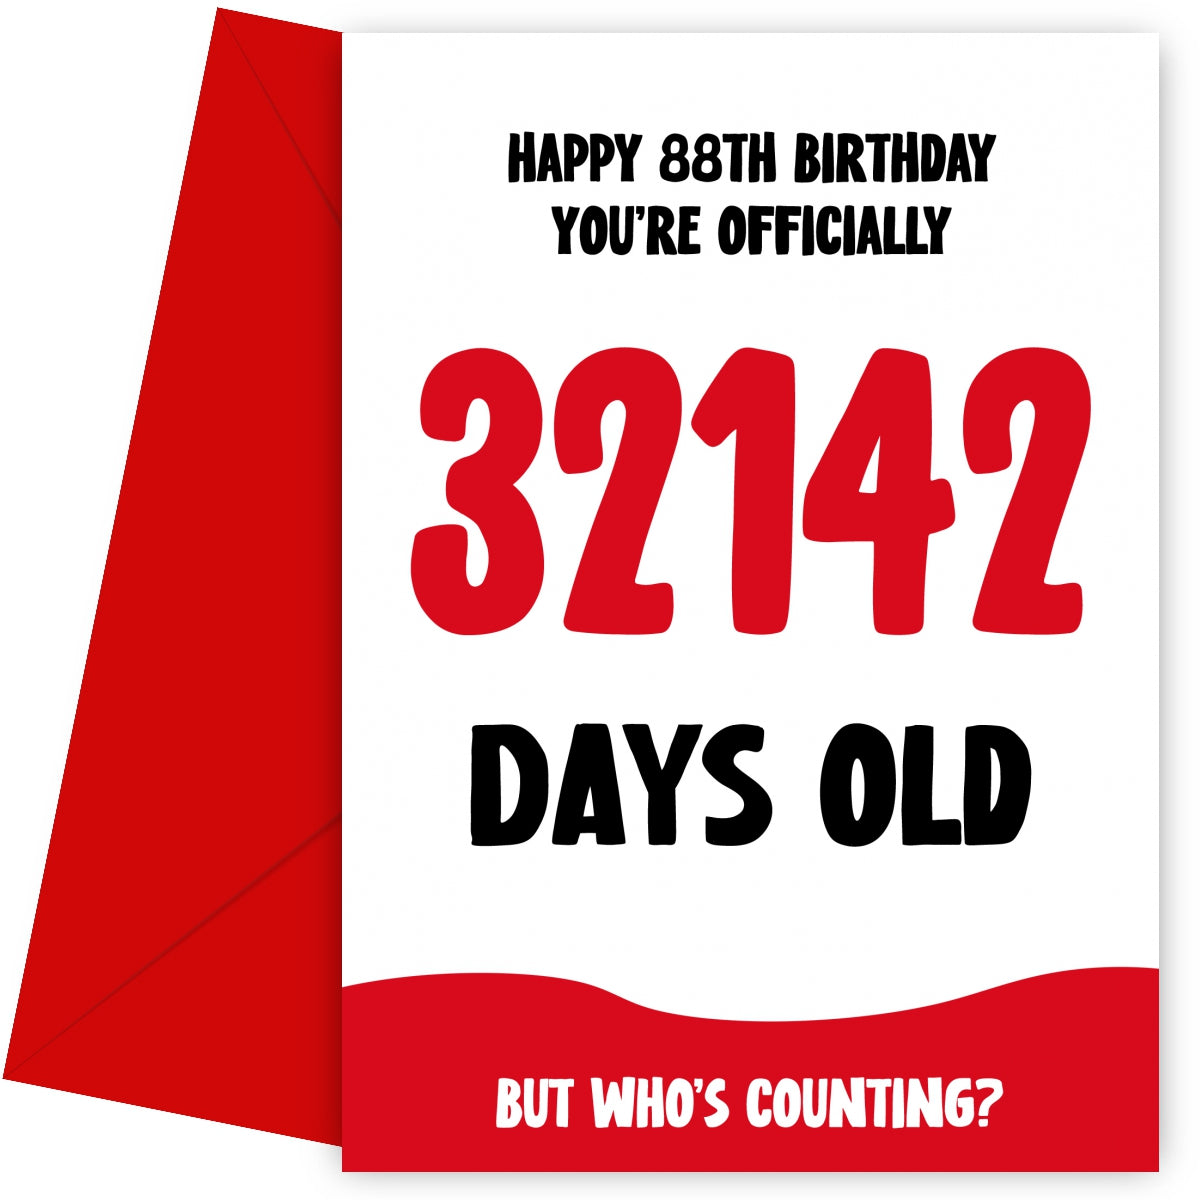 Funny 88th Birthday Card for Men and Women - 32142 Days Old